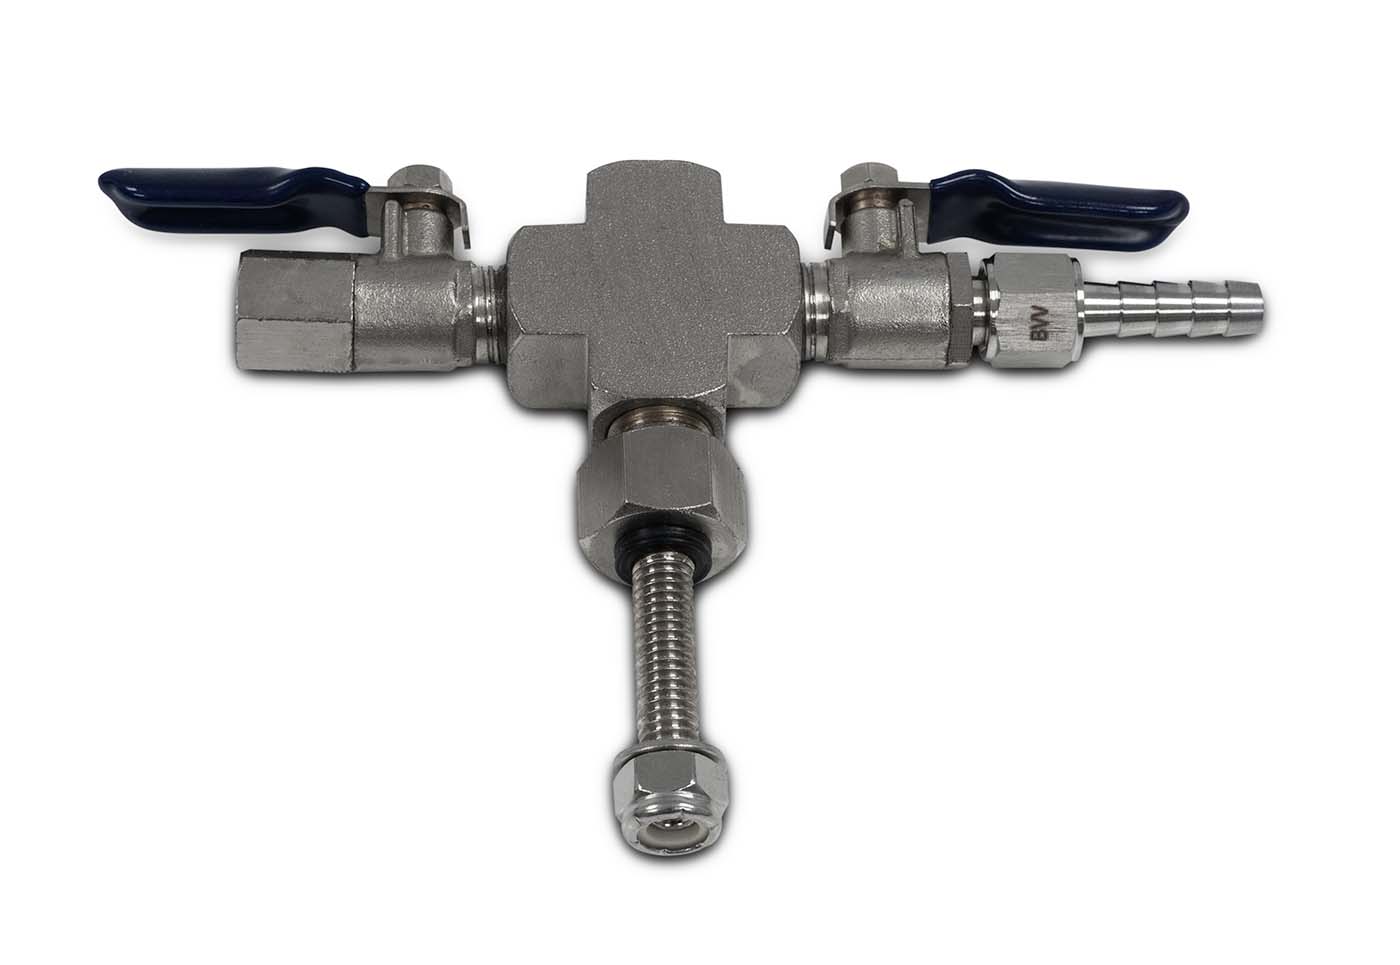 Valve Manifold - Cross with Hose Barb Questions & Answers